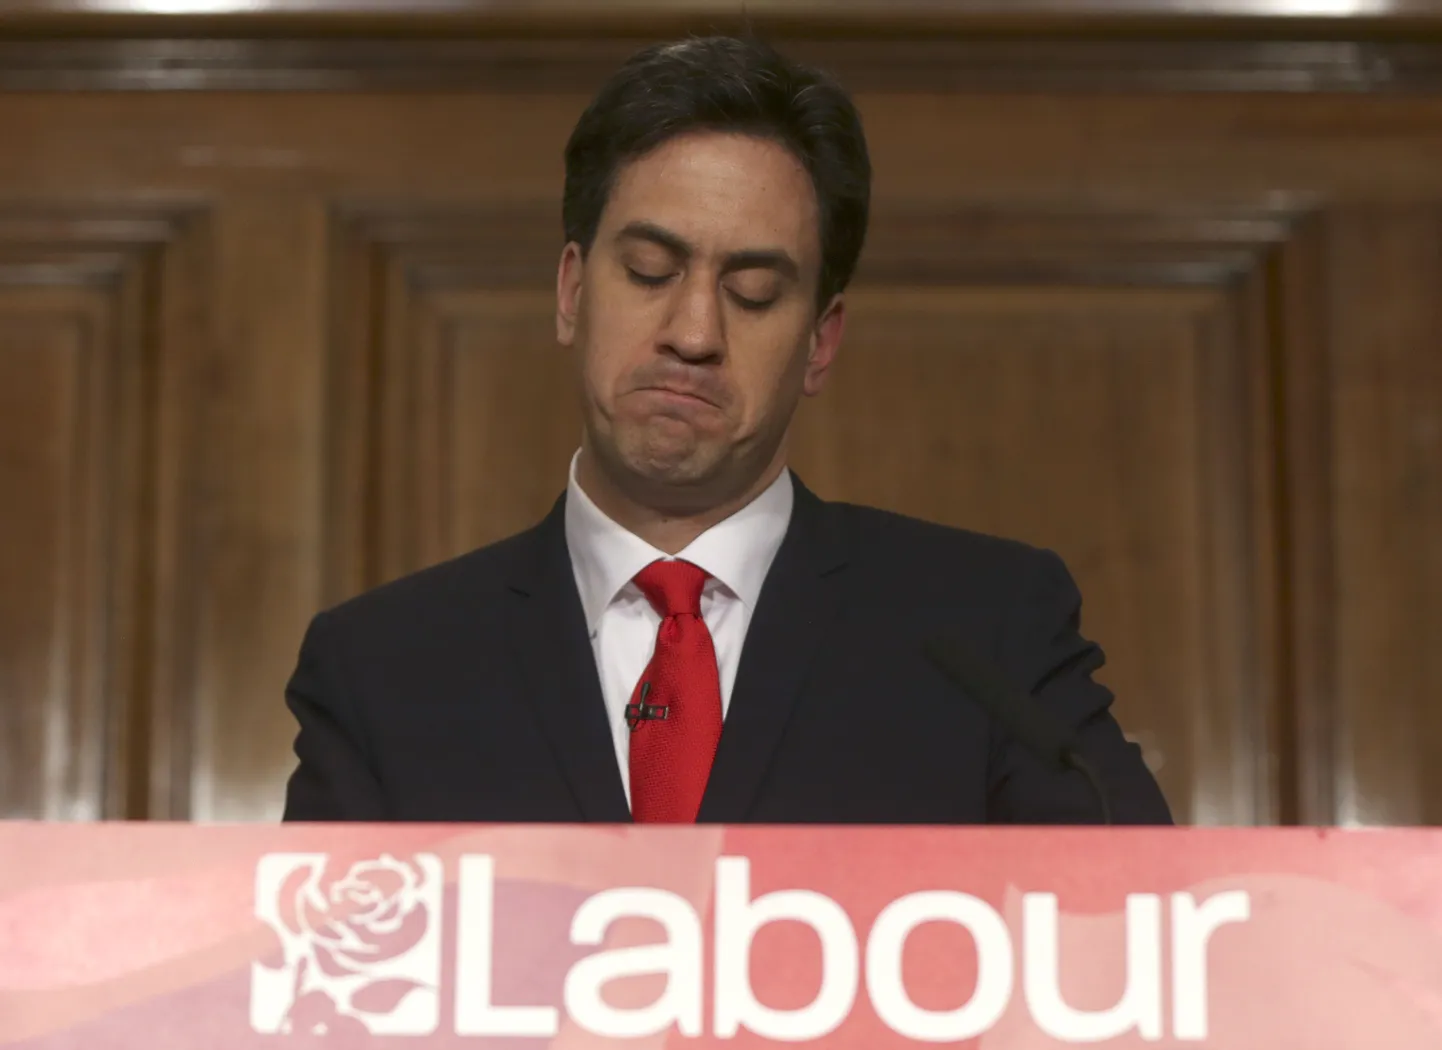 Britain's opposition Labour Party leader Ed Miliband announces his resignation as leader at a news conference in London, Britain May 8, 2015. Prime Minister David Cameron won a shock election victory in Britain, overturning predictions that the vote would be the closest in decades to sweep into office for another five years, with his Labour opponents in tatters.    REUTERS/Neil Hall  TPX IMAGES OF THE DAY